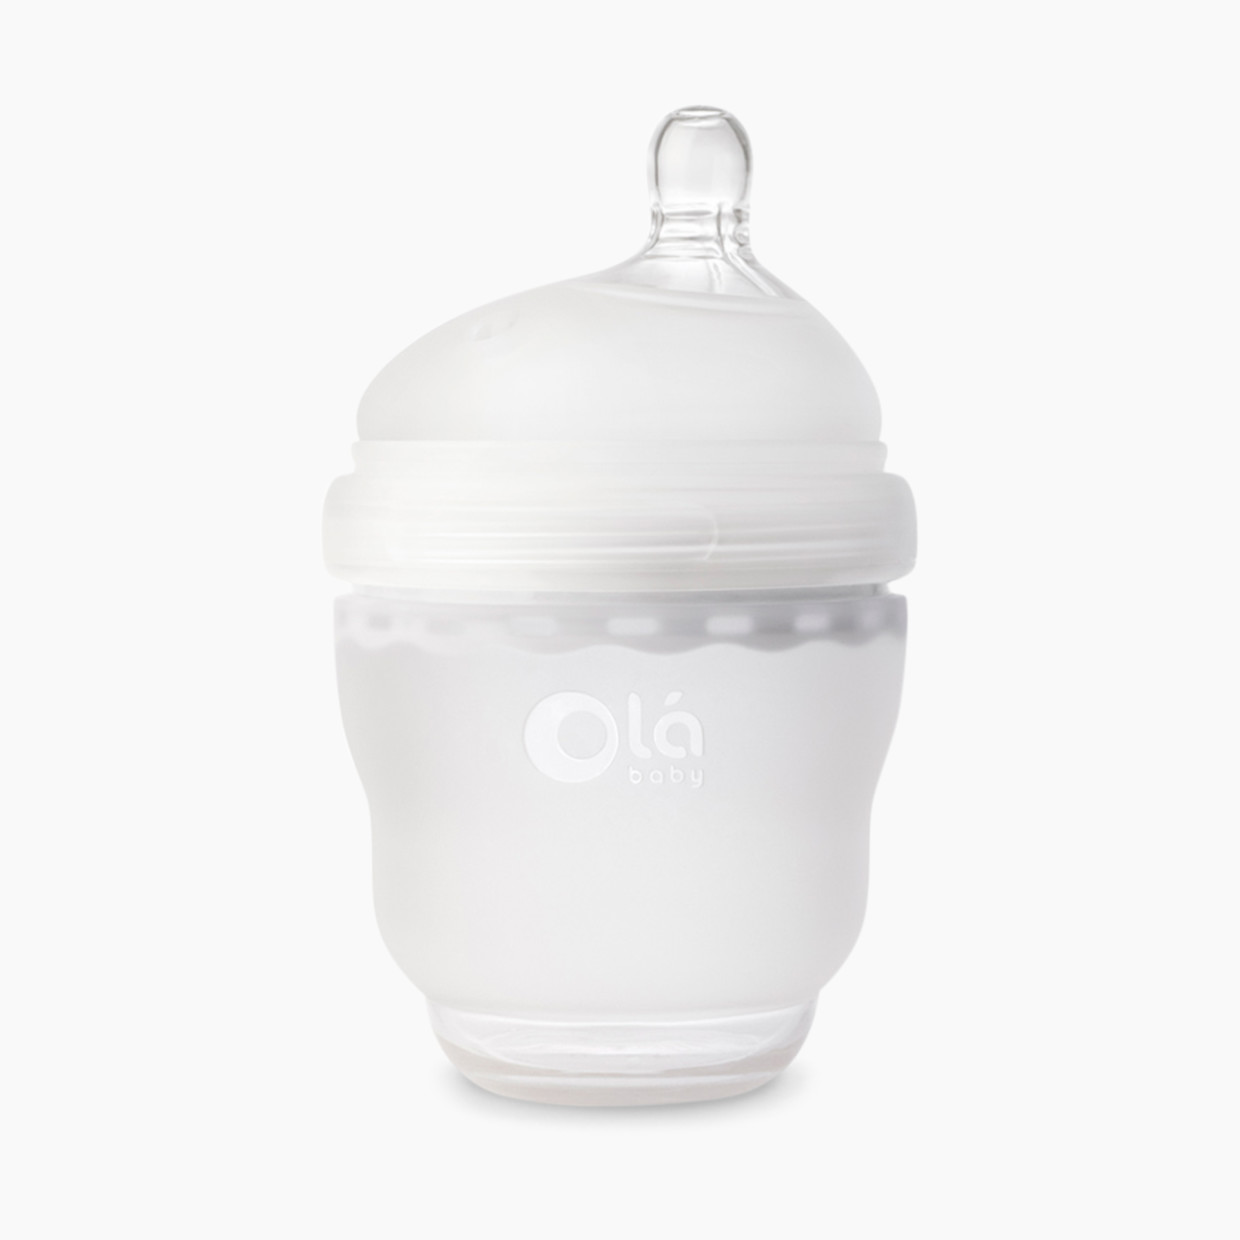 Olababy Gentle Baby Bottle - Frost, 4 Oz, 1.